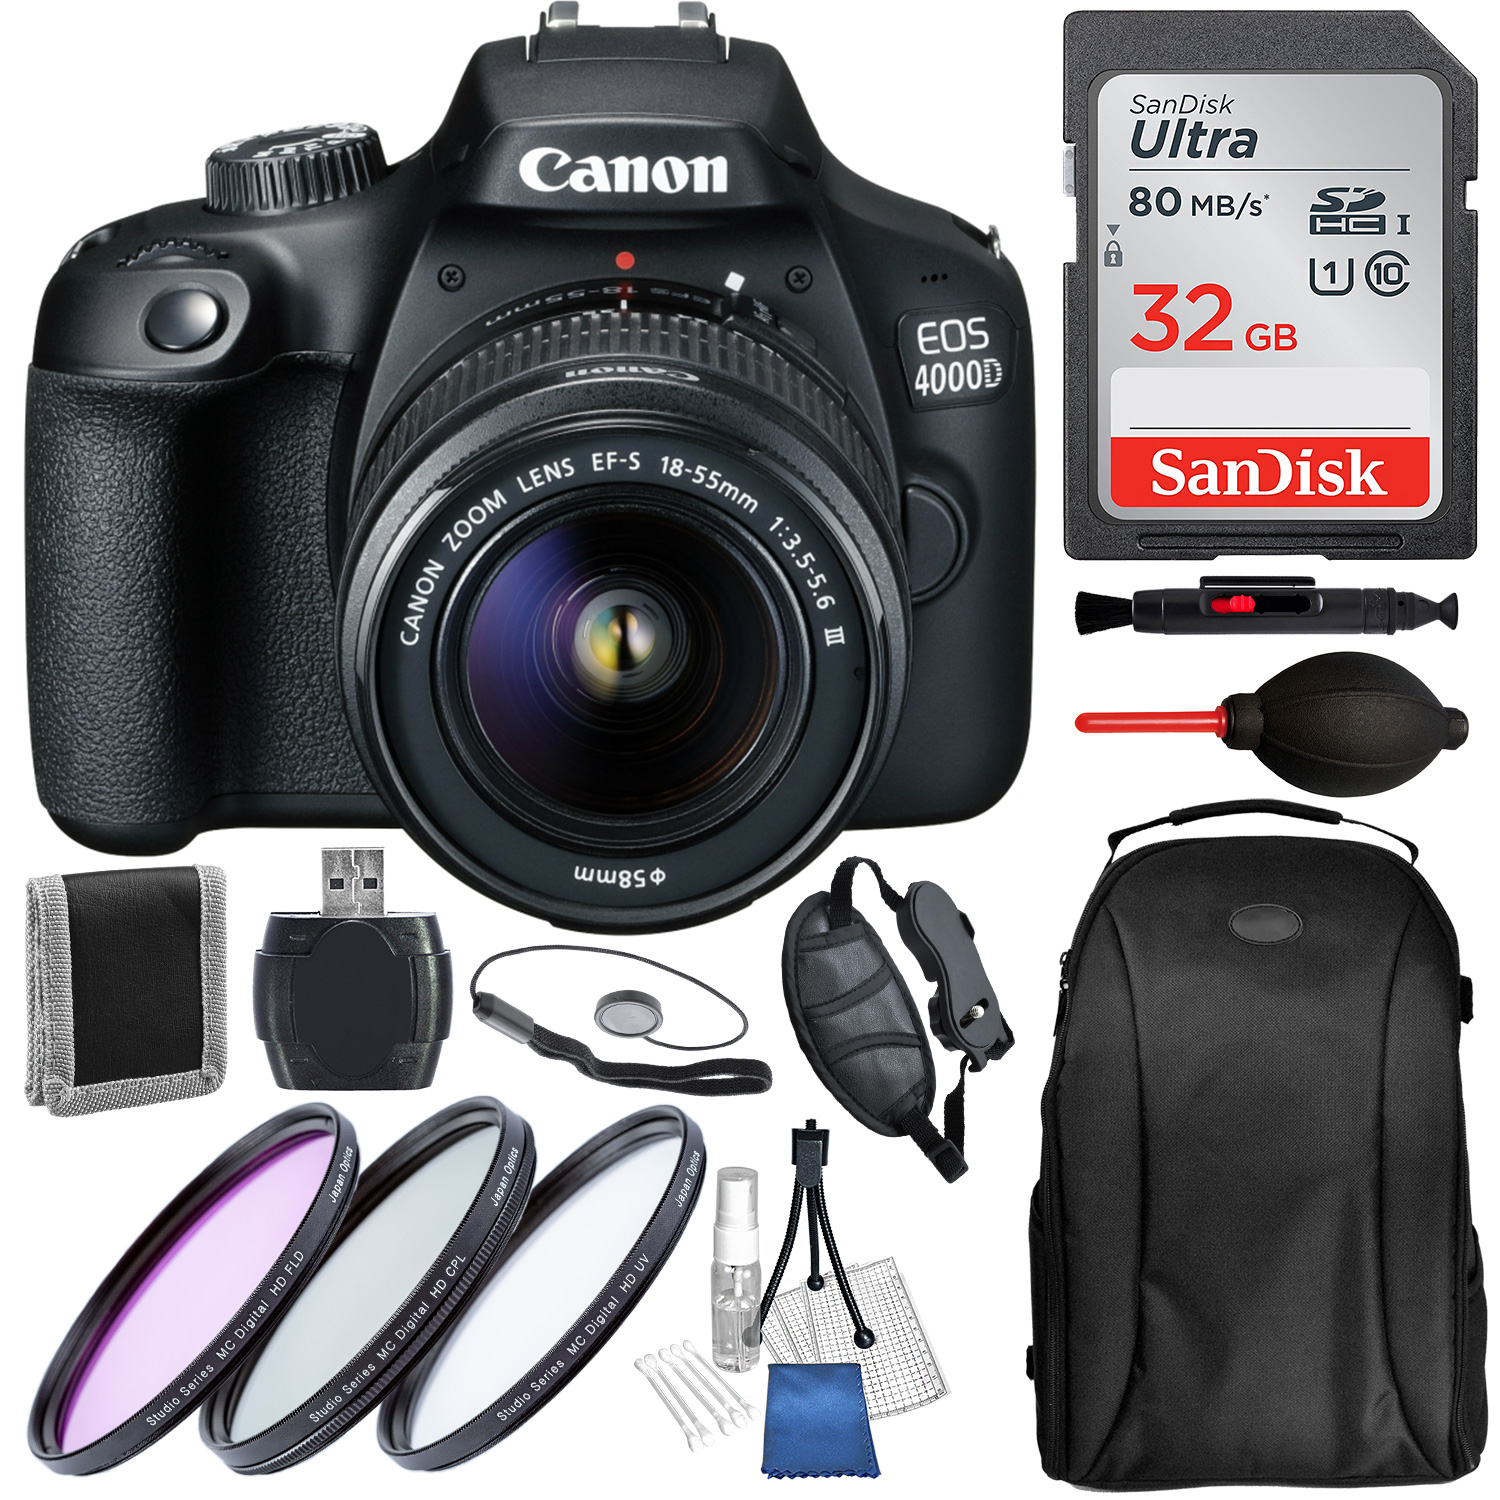 Canon EOS 4000D with EF-S 18-55mm f/3.5-5.6 III and Accessory Bundle